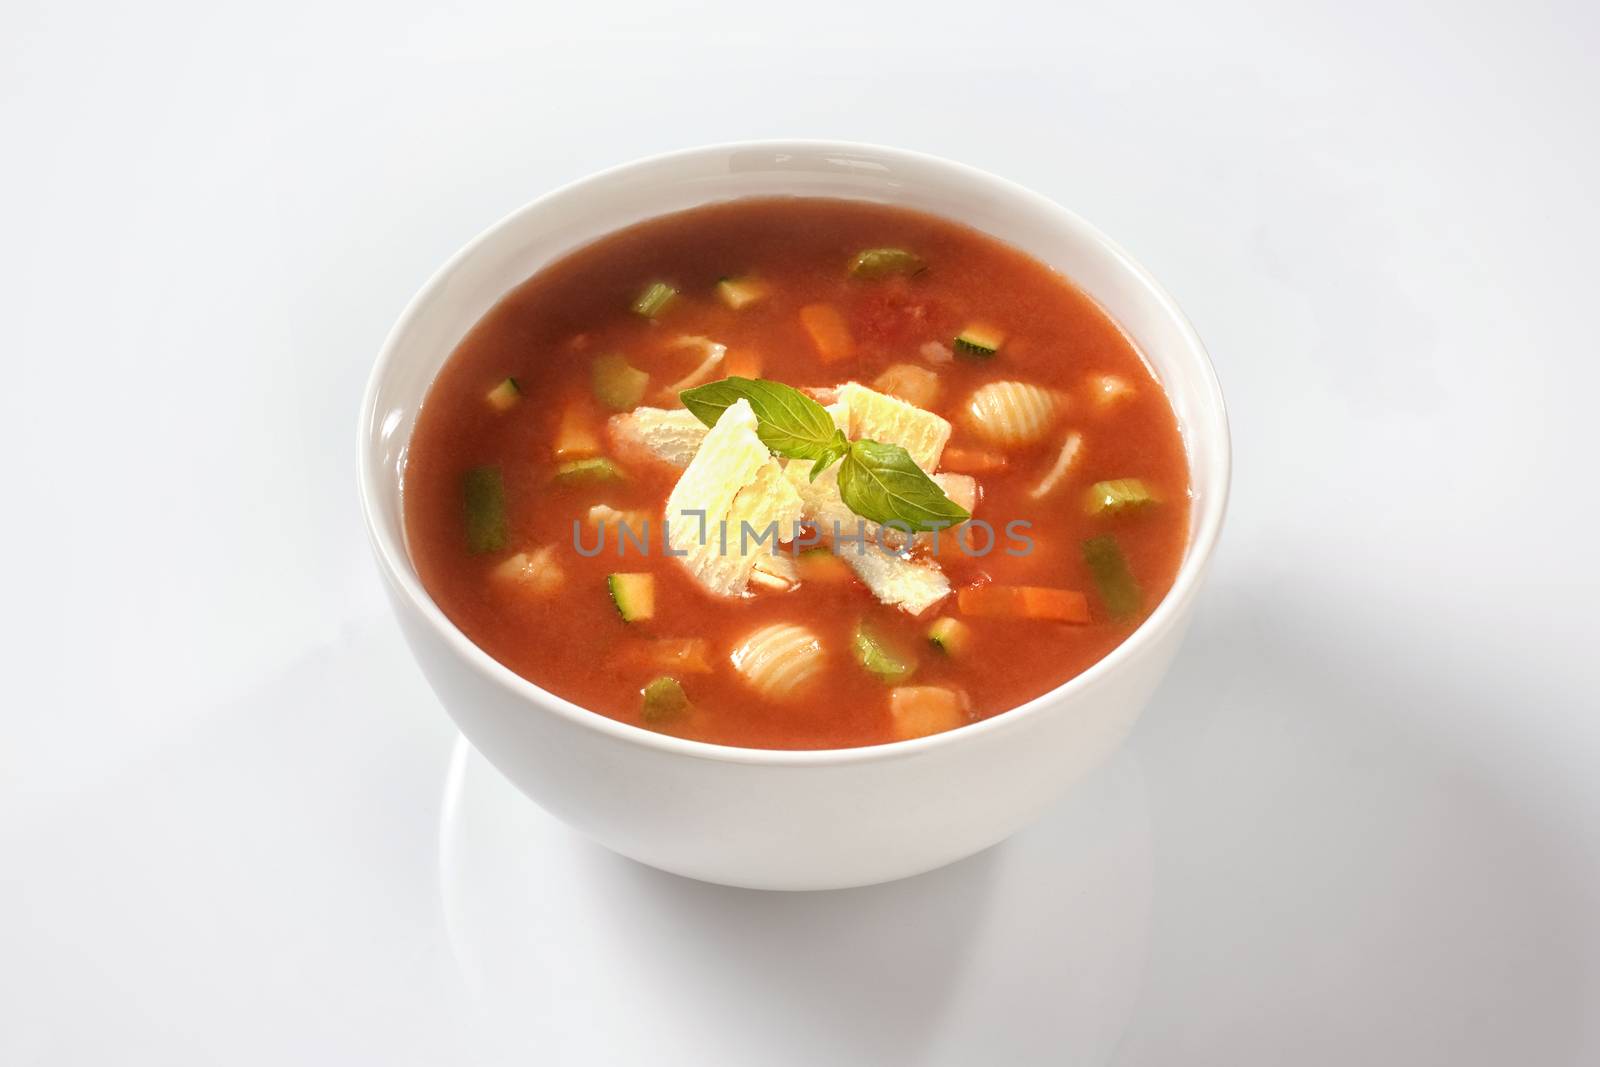 Homemade delicious minestrone soup with cheese and basil by janssenkruseproductions